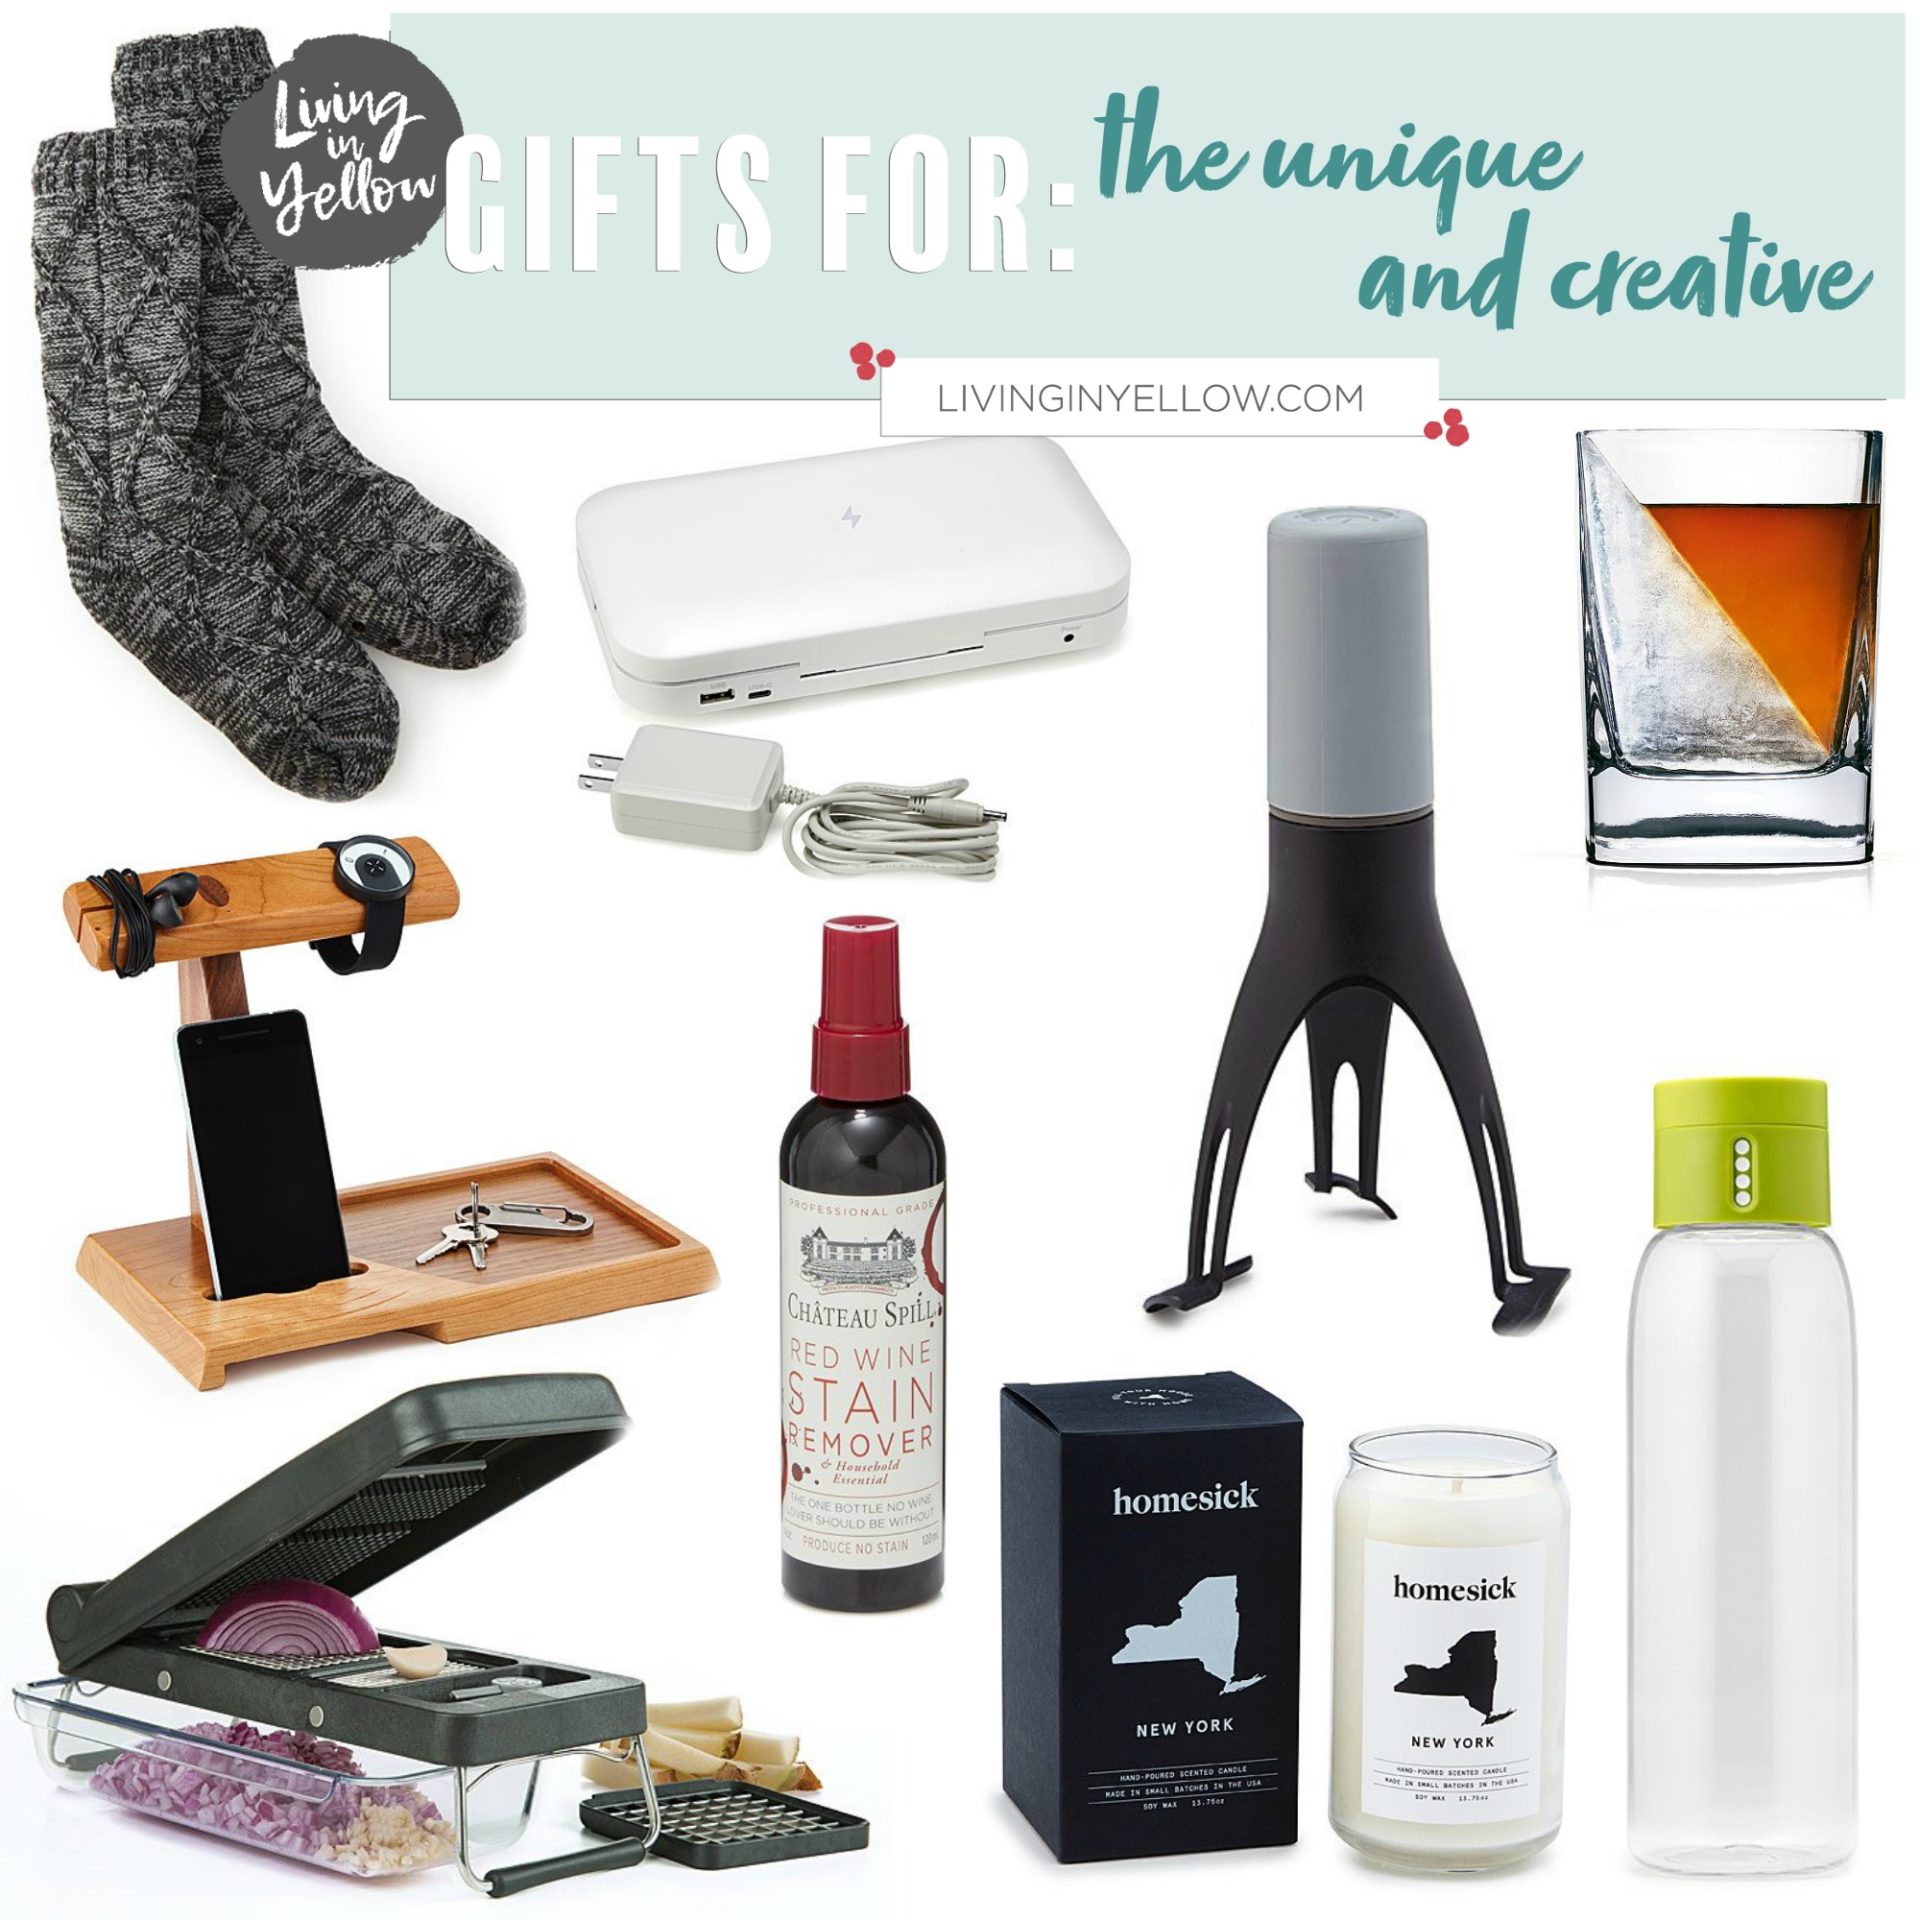 Gift Guide // Stocking Stuffers for Him - Living in Yellow